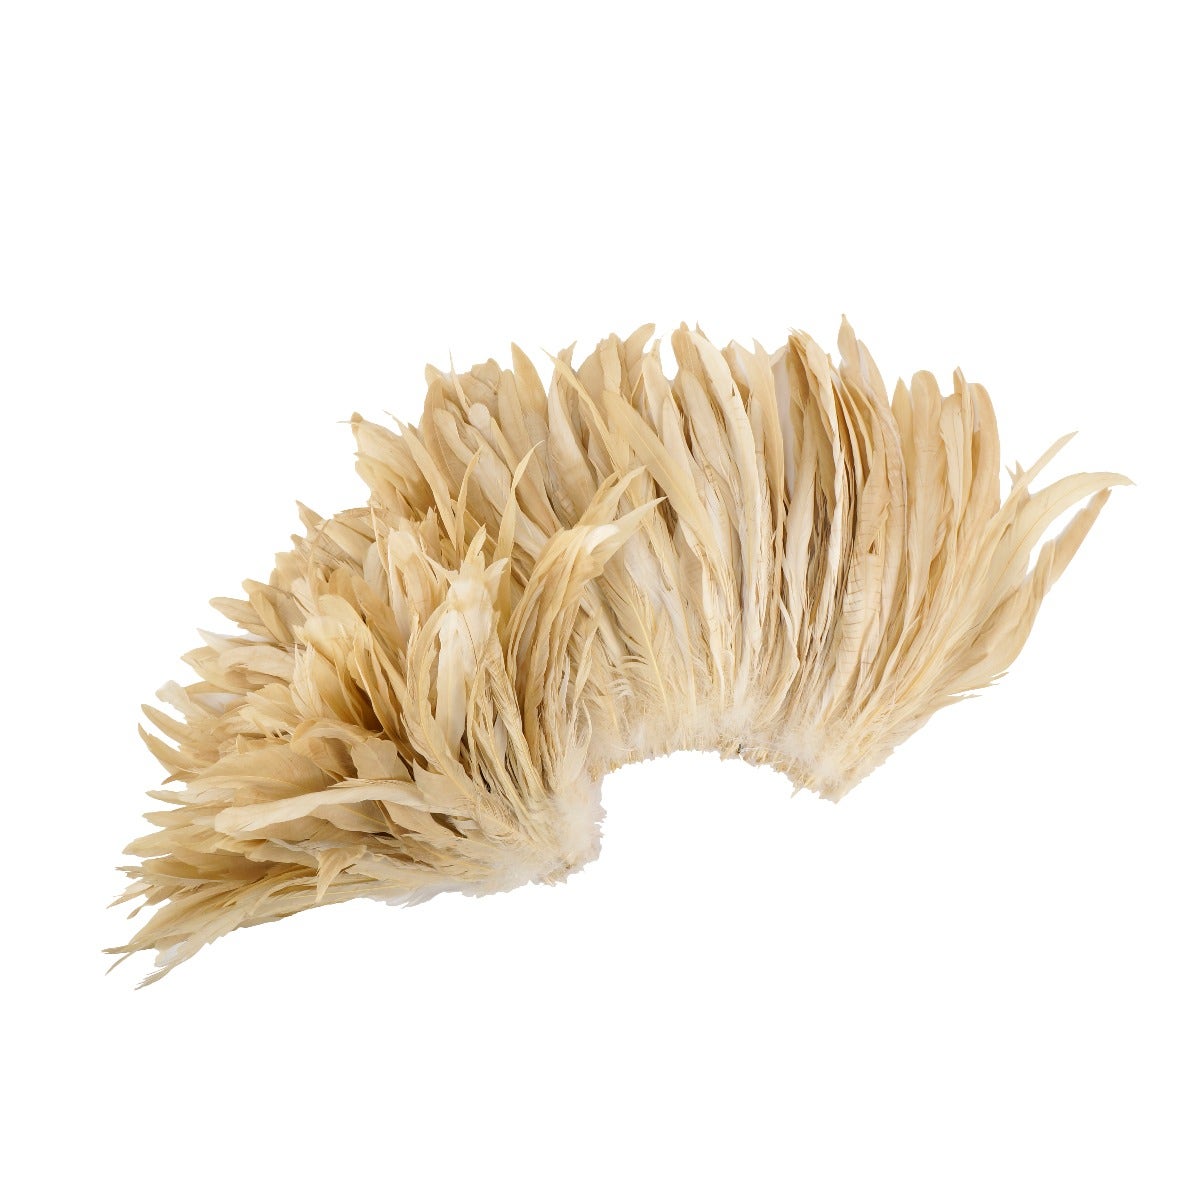 ROOSTER COQUE TAILS FEATHERS BLEACH DYED 7-10” - 1/2 Yard (18") - Beige